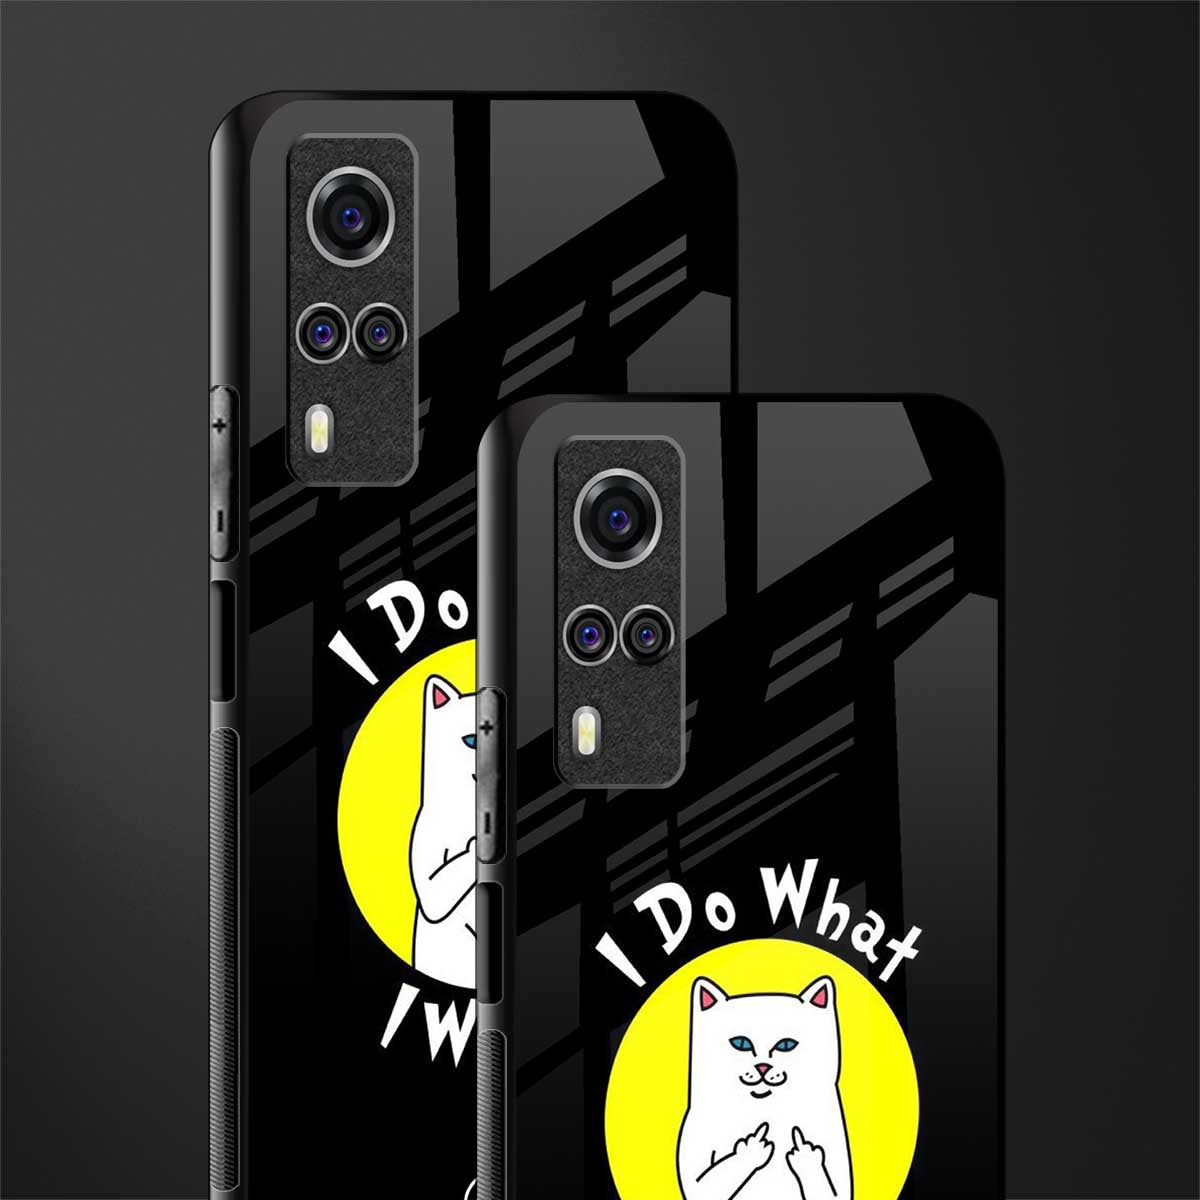 i do what i want glass case for vivo y51